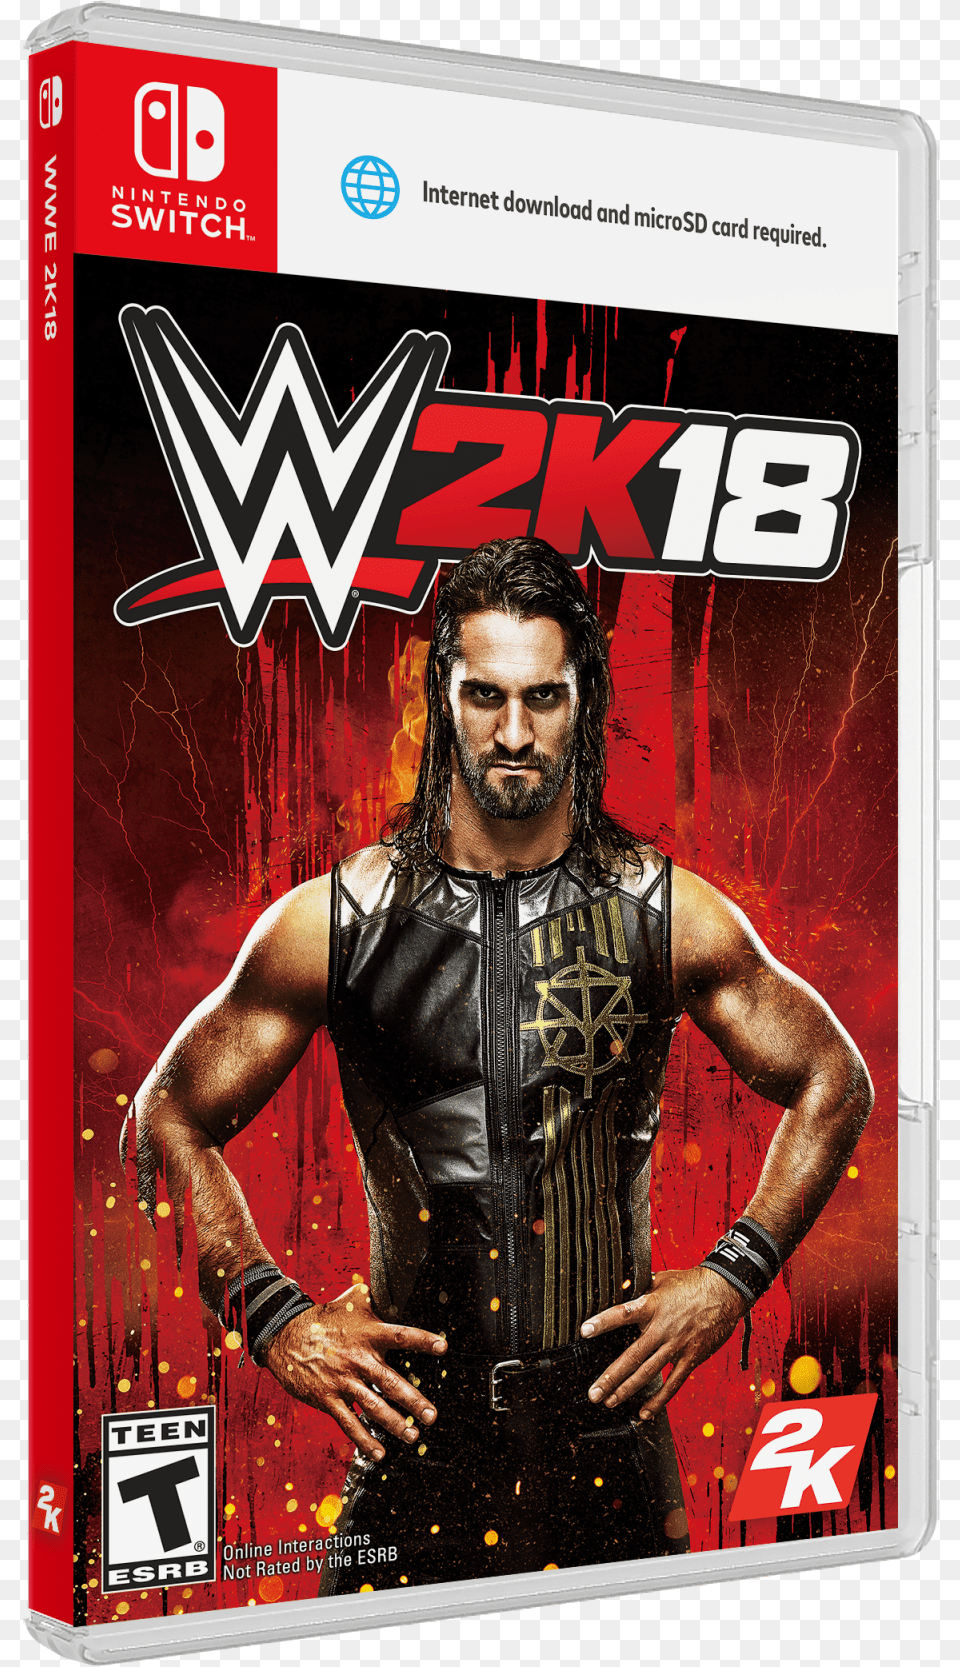 Image 2k18 Wwe Nintendo Switch, Adult, Person, Man, Male Free Png